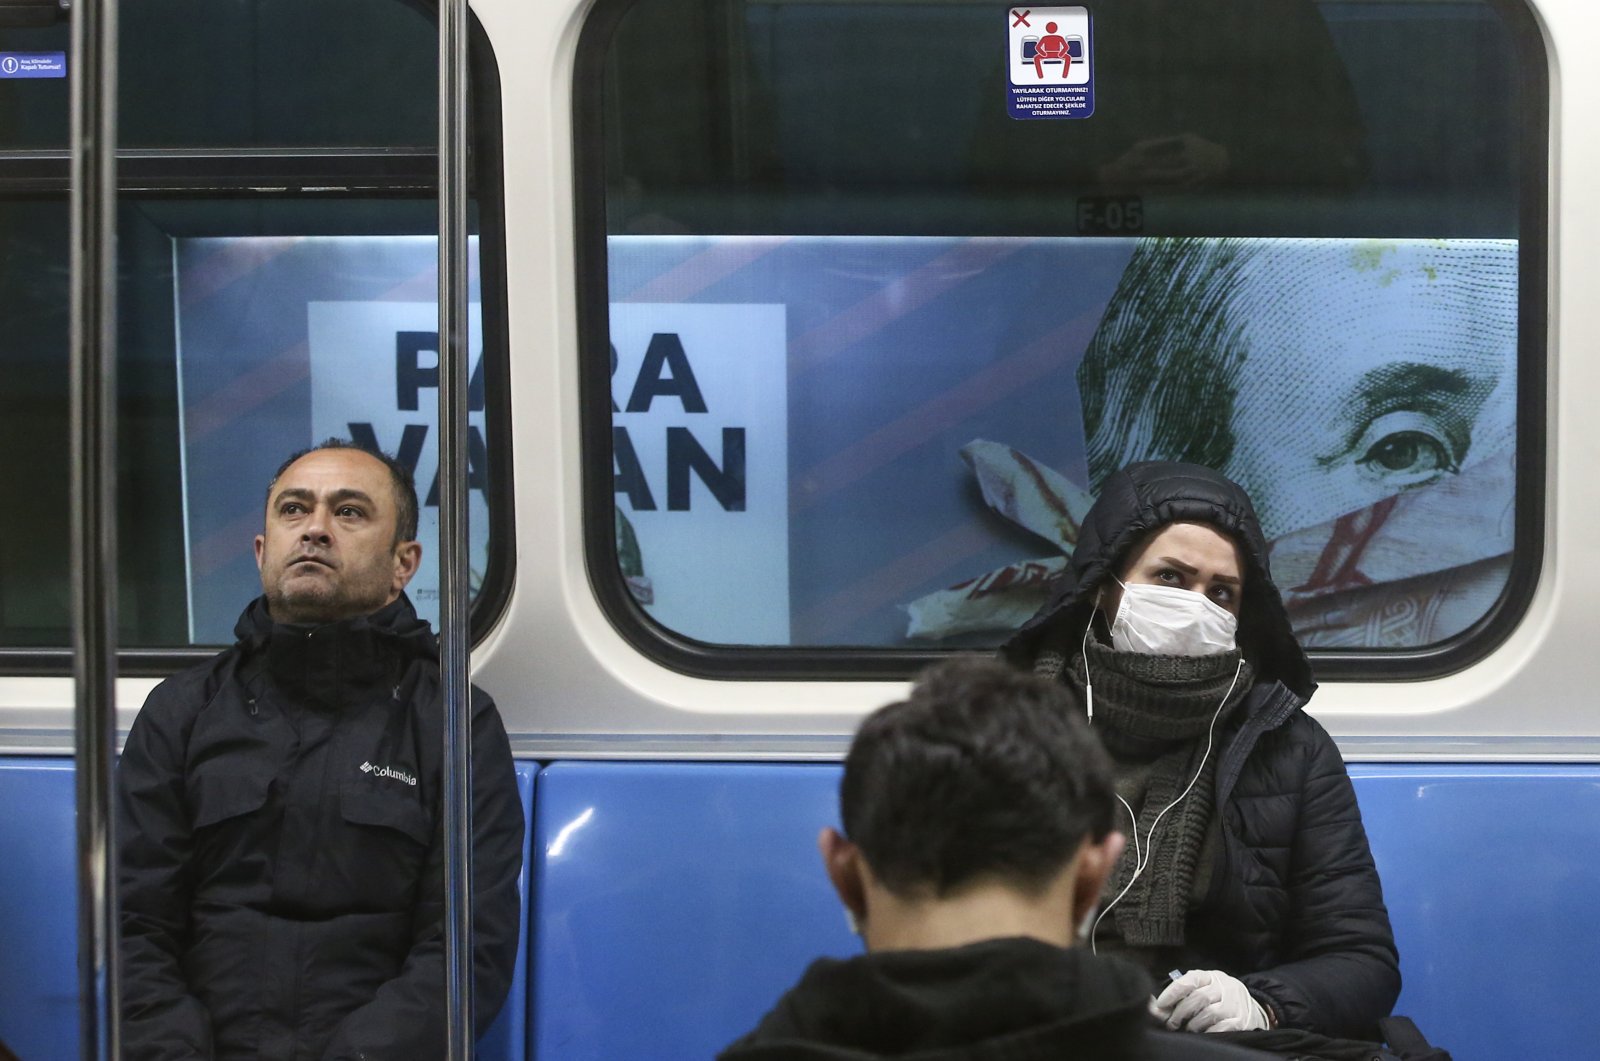 Commuters in an underground train, some wearing masks, are driven past a billboard of a book advertisement featuring a picture of U.S. President Benjamin Franklin on the $100 bill, in Istanbul, Turkey, Wednesday, March 25, 2020. (AP Photo)